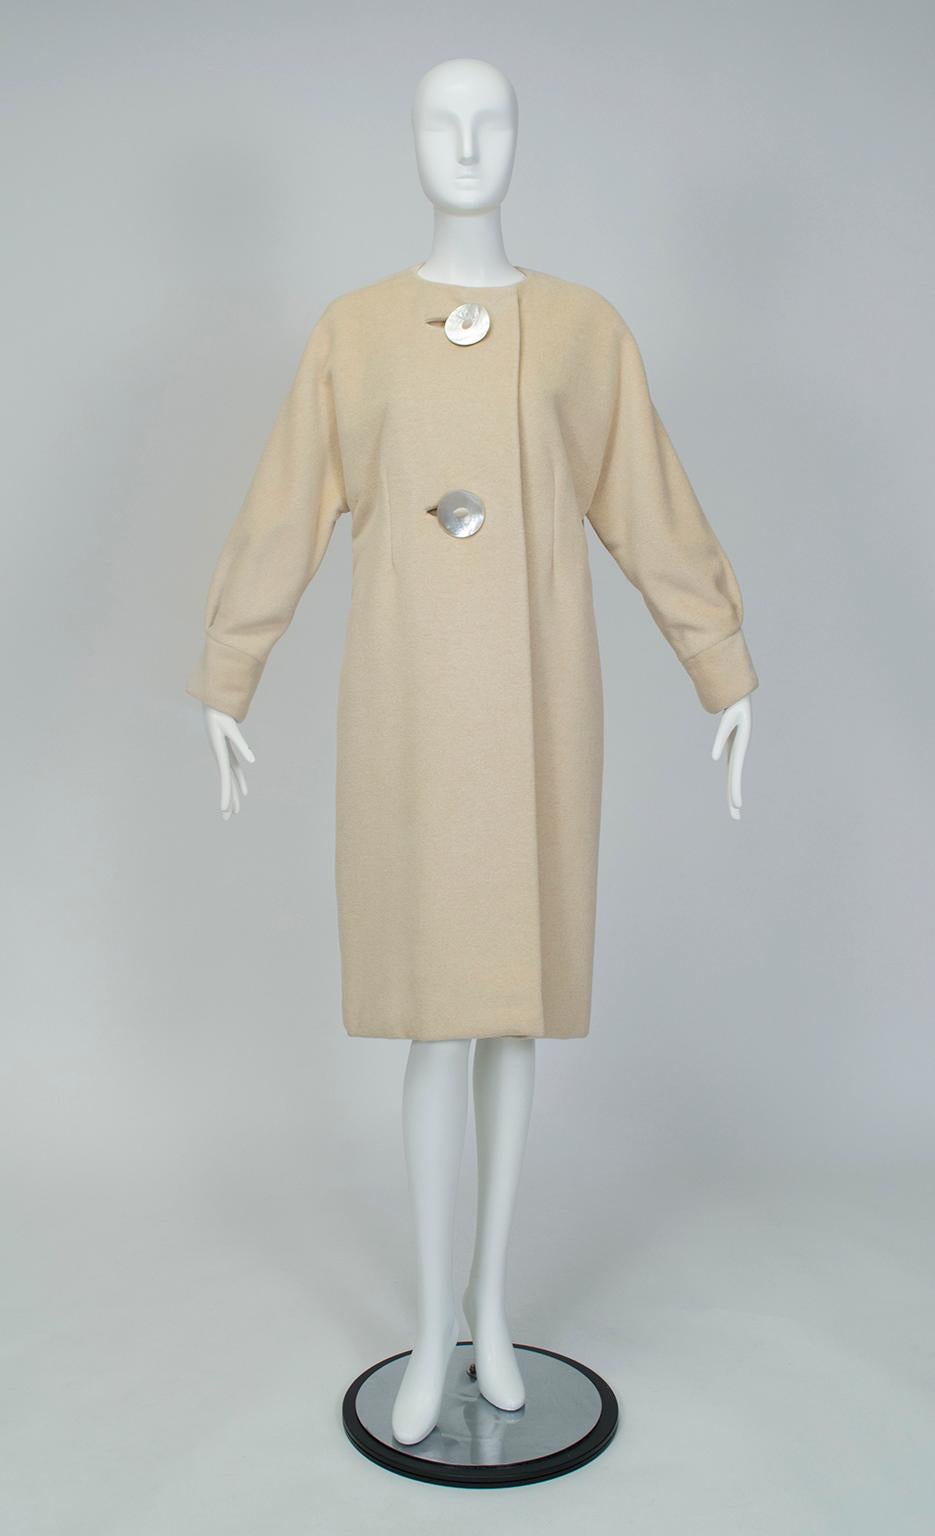 Beyond its minimalist silhouette and luxury-weight cashmere fabric, what sets this coat apart are its details, namely its chic balloon sleeves and massive mother of pearl buttons. Its timeless cut and neutral color will carry you from season to